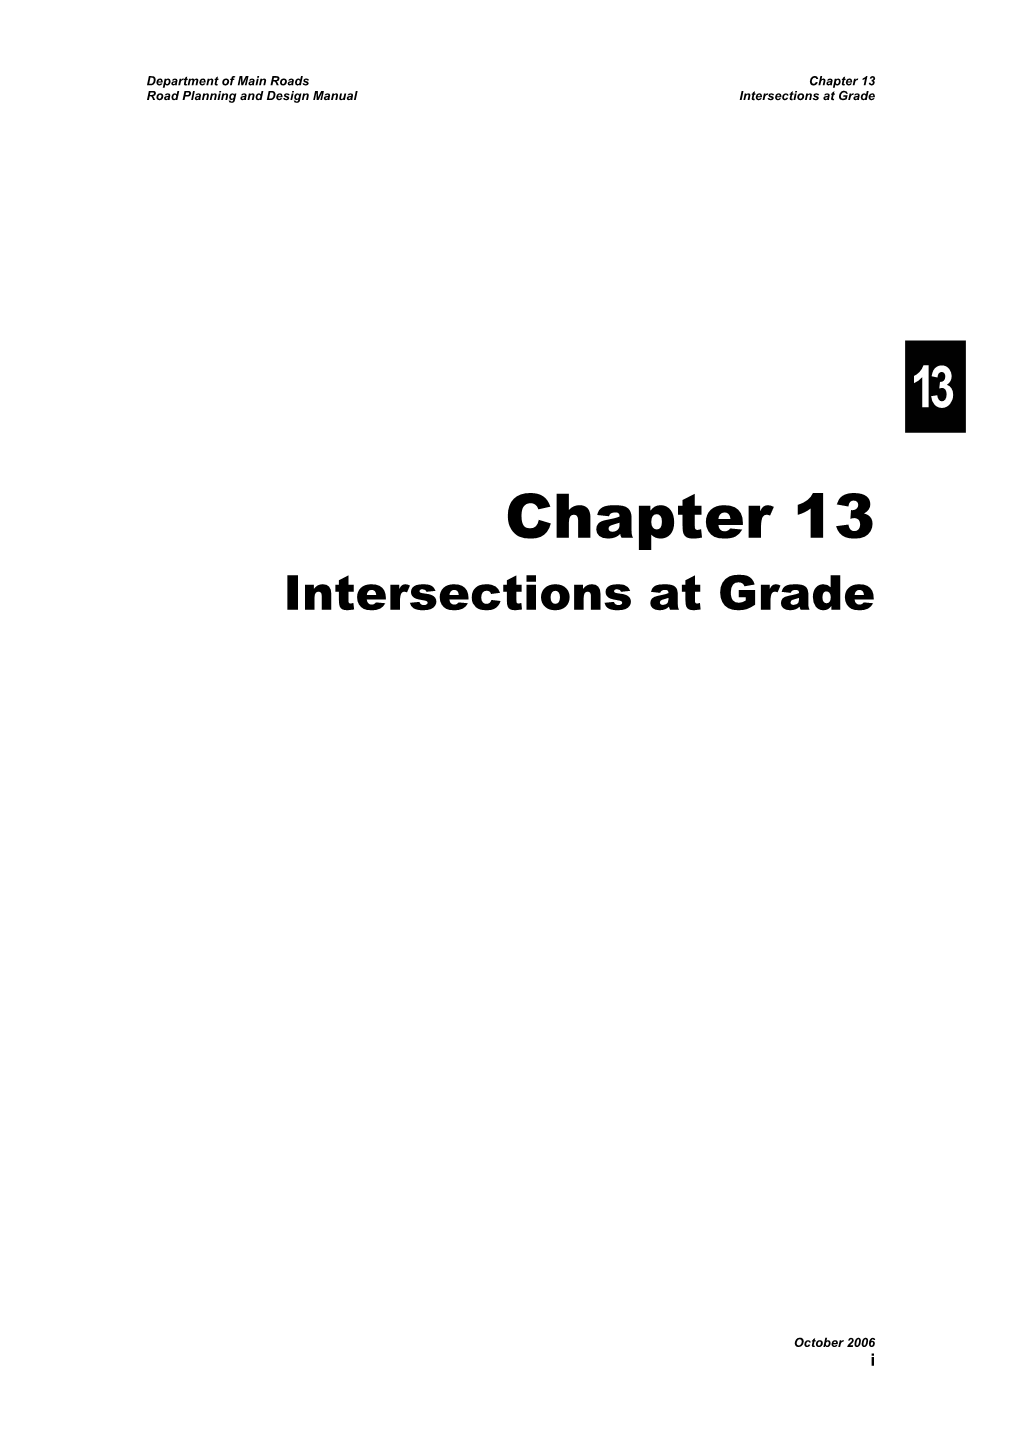 Chapter 13: Intersections at Grade